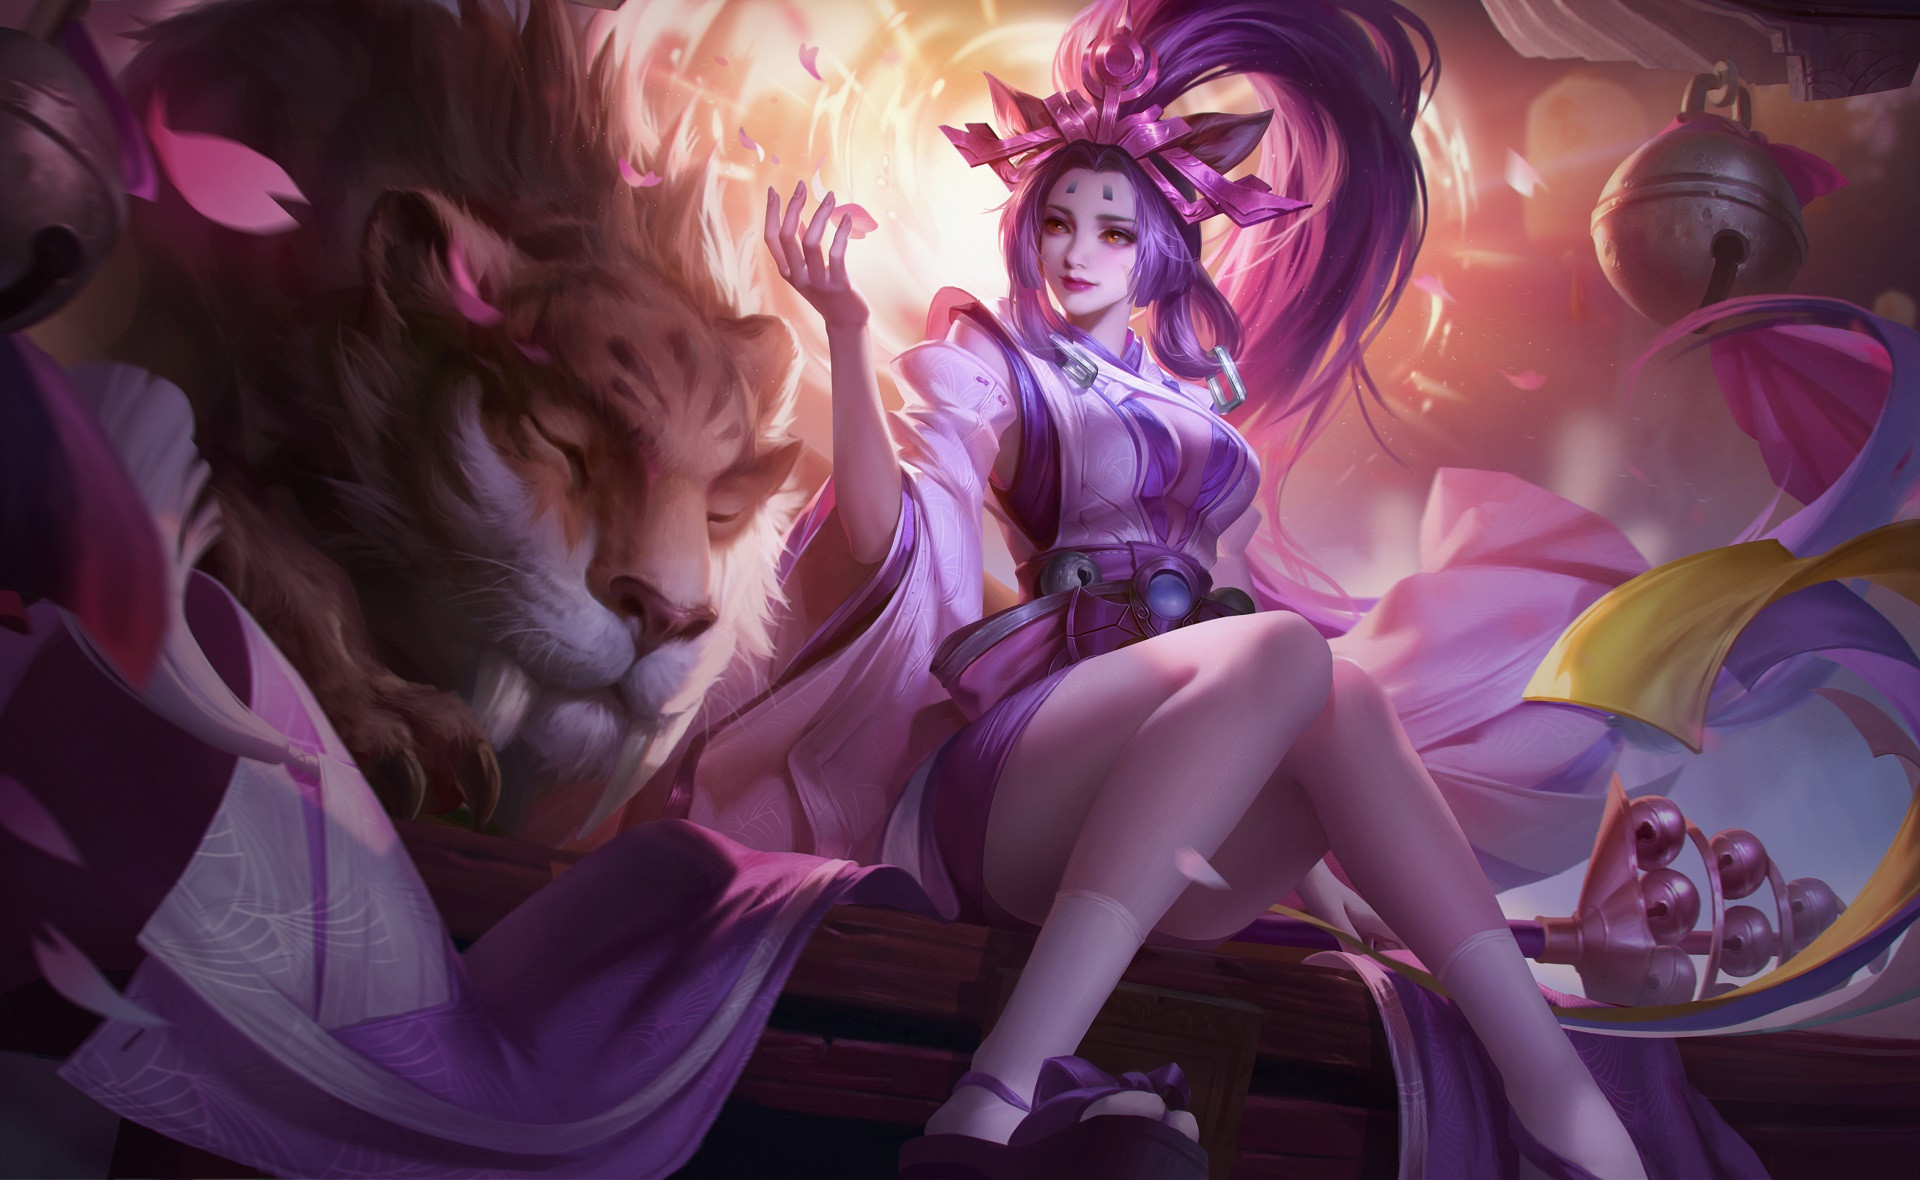 Anime 1920x1180 Arena of Valor video games video game art video game girls video game characters animals petals animal ears